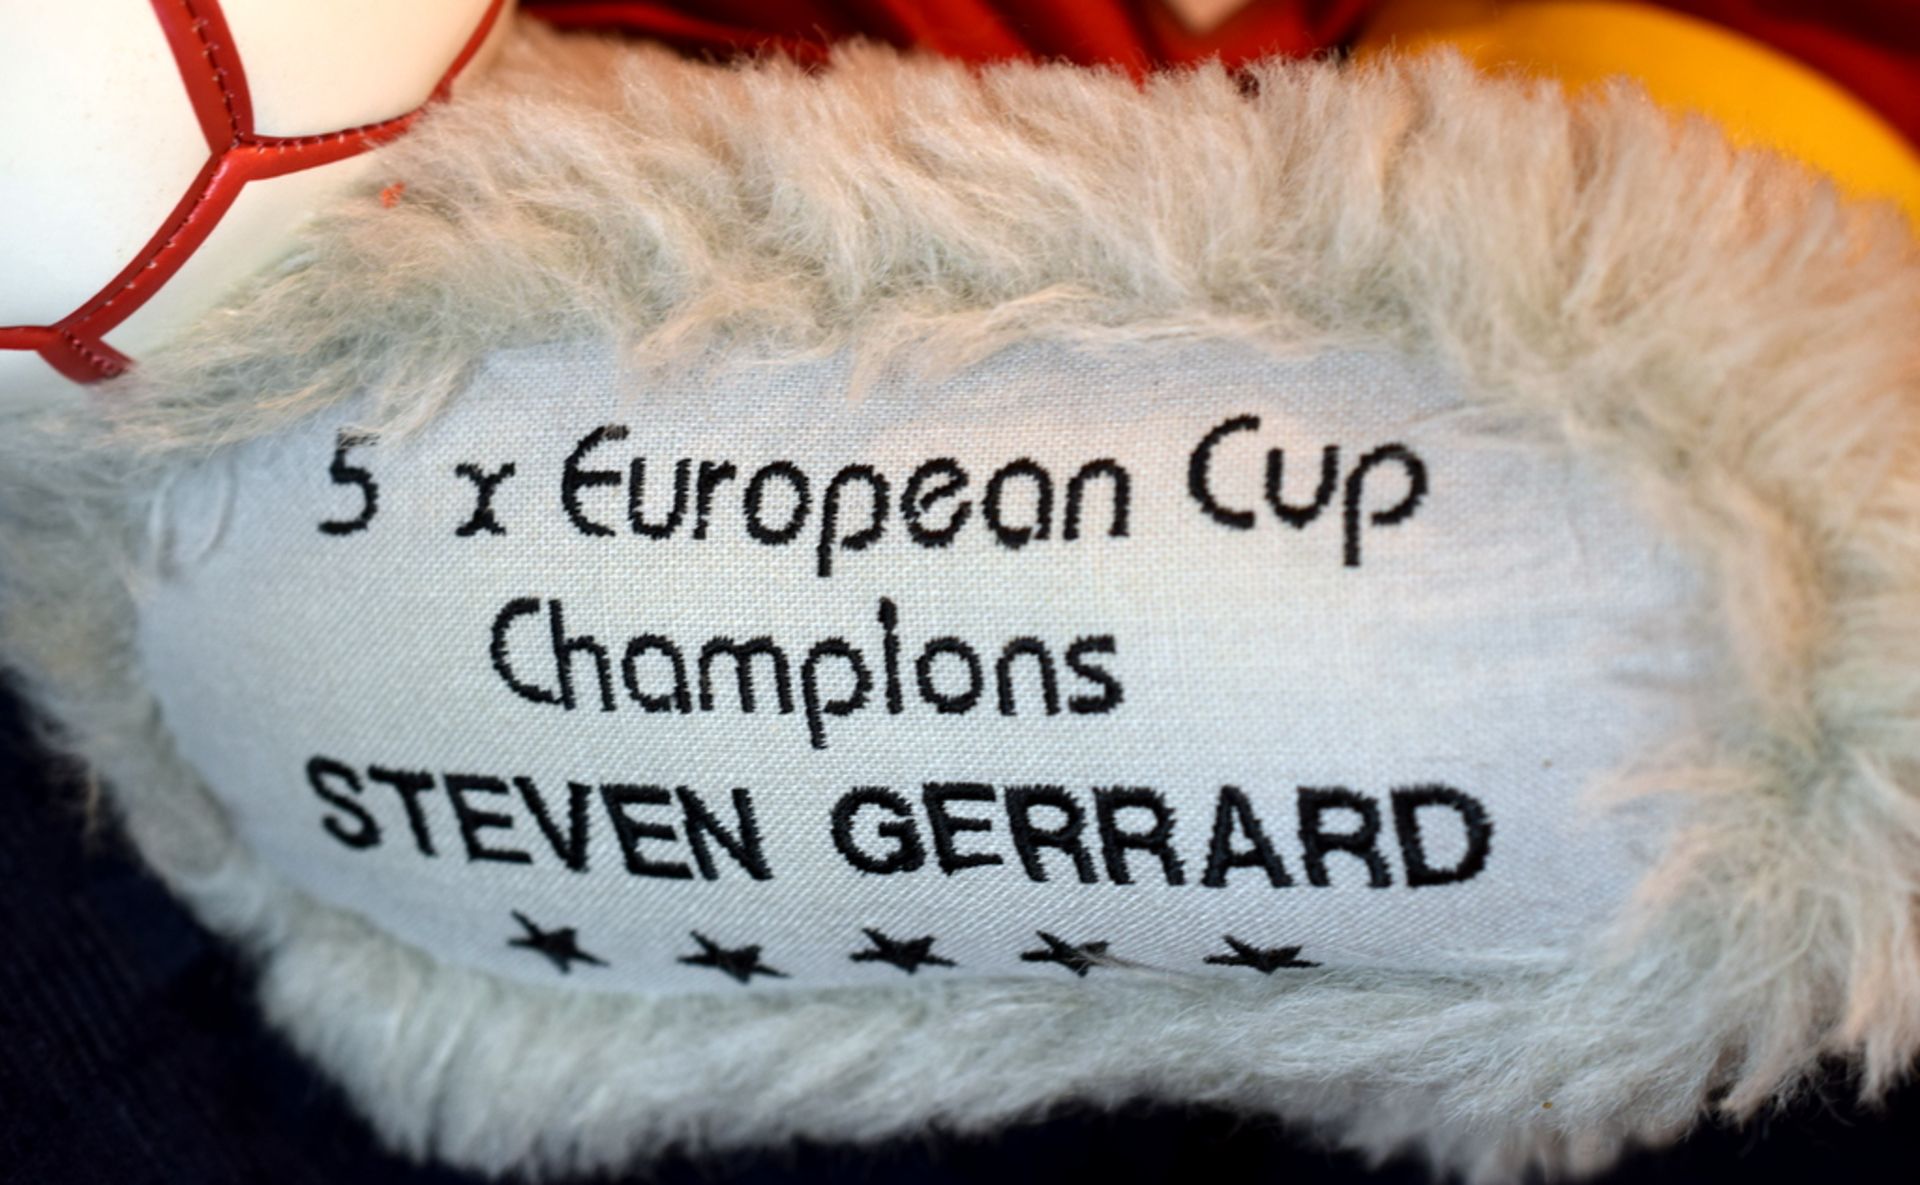 Steven Gerrard One Of A Kind Bear By Fiona Wells - Image 3 of 5